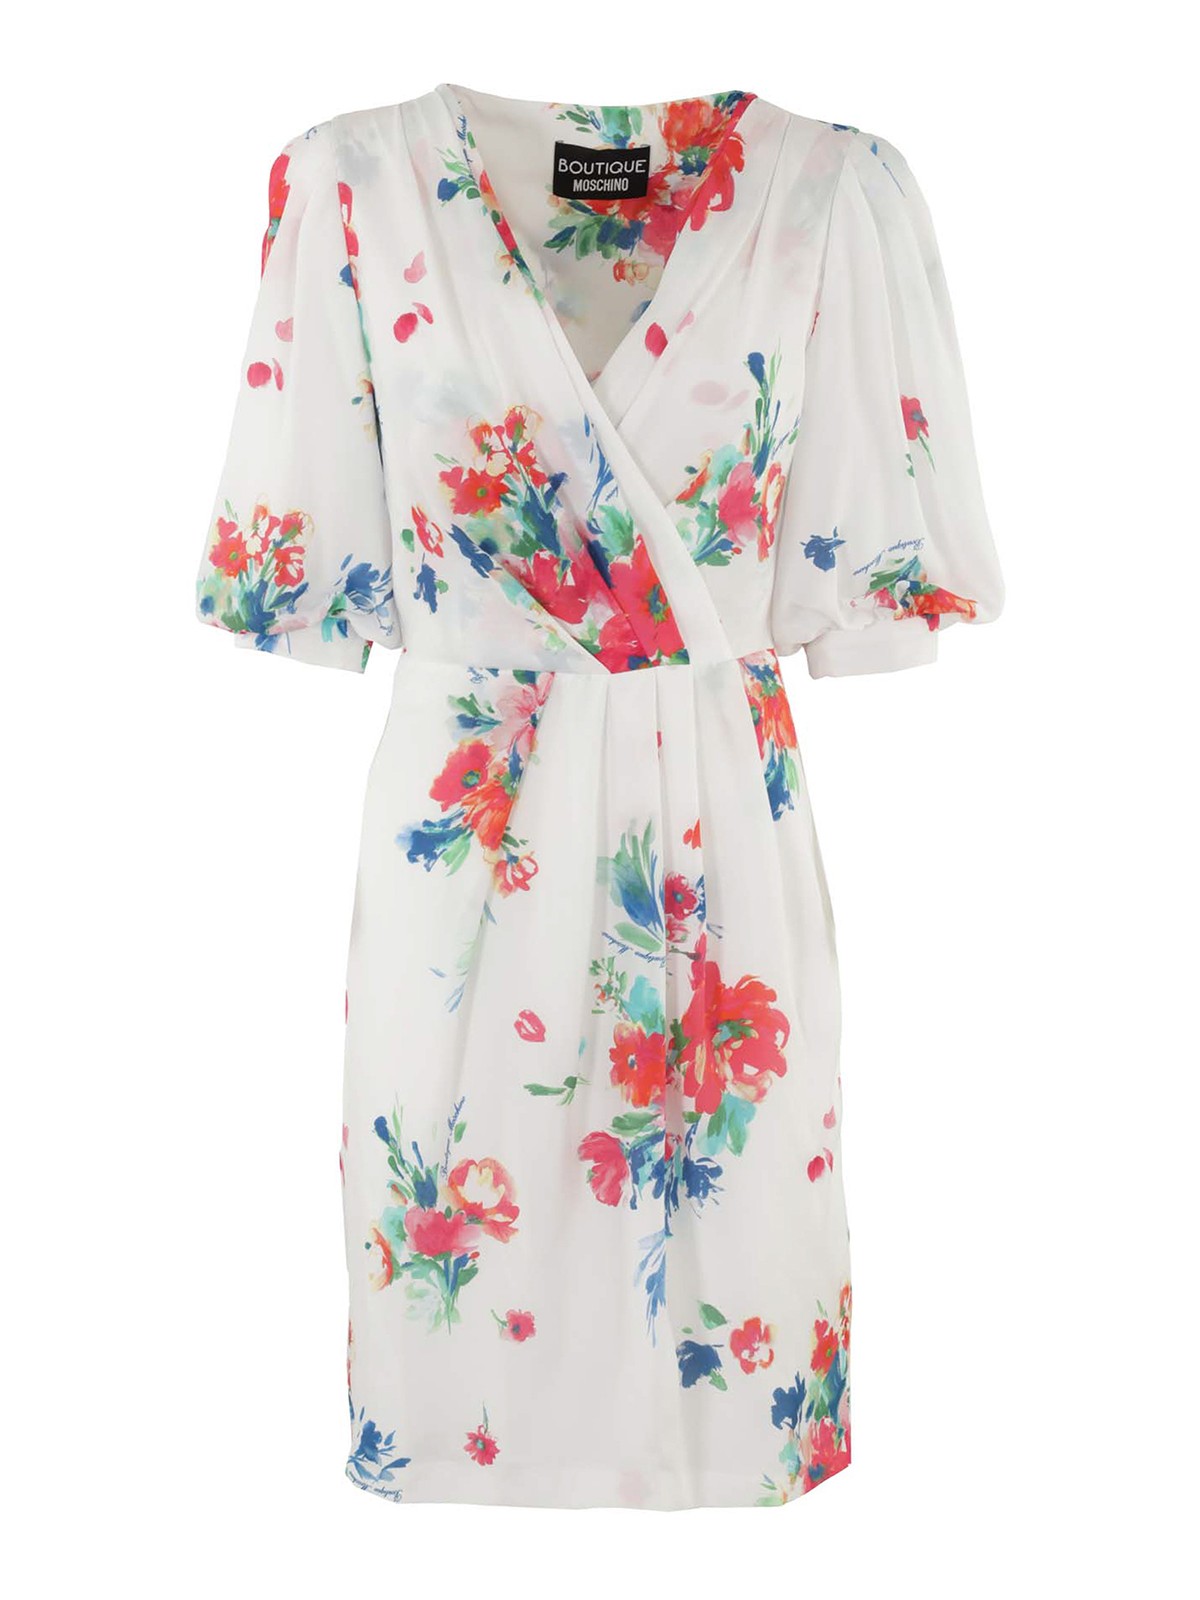 BOUTIQUE MOSCHINO FLORAL PATTERNED COCKTAIL DRESS